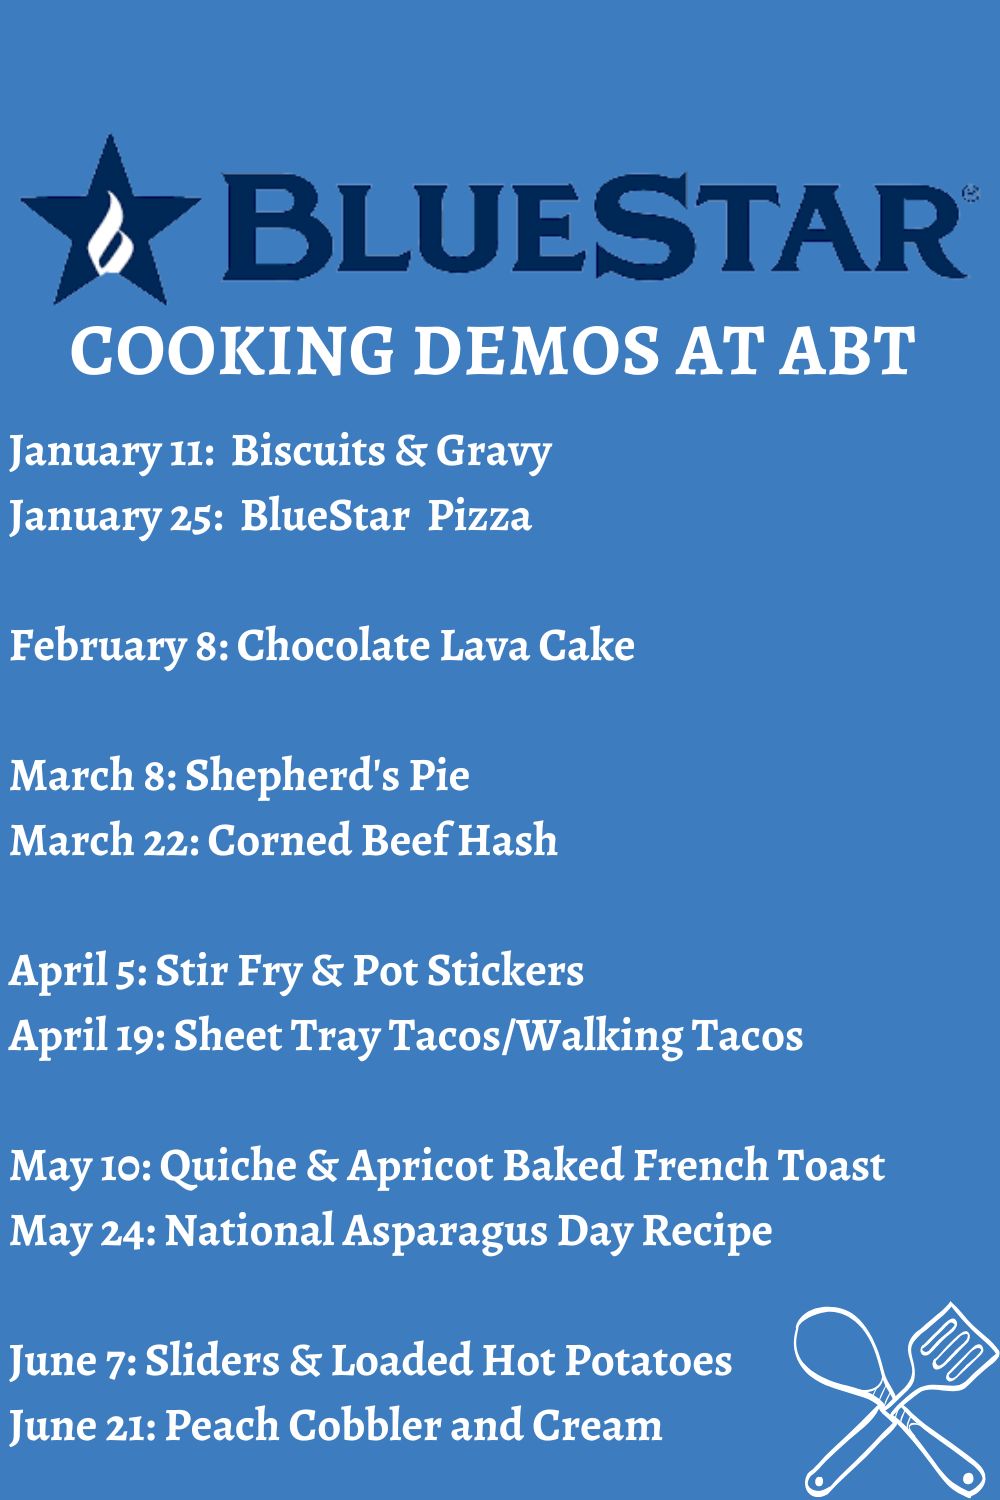 schedule of BlueStar cooking demos from January to June 2023